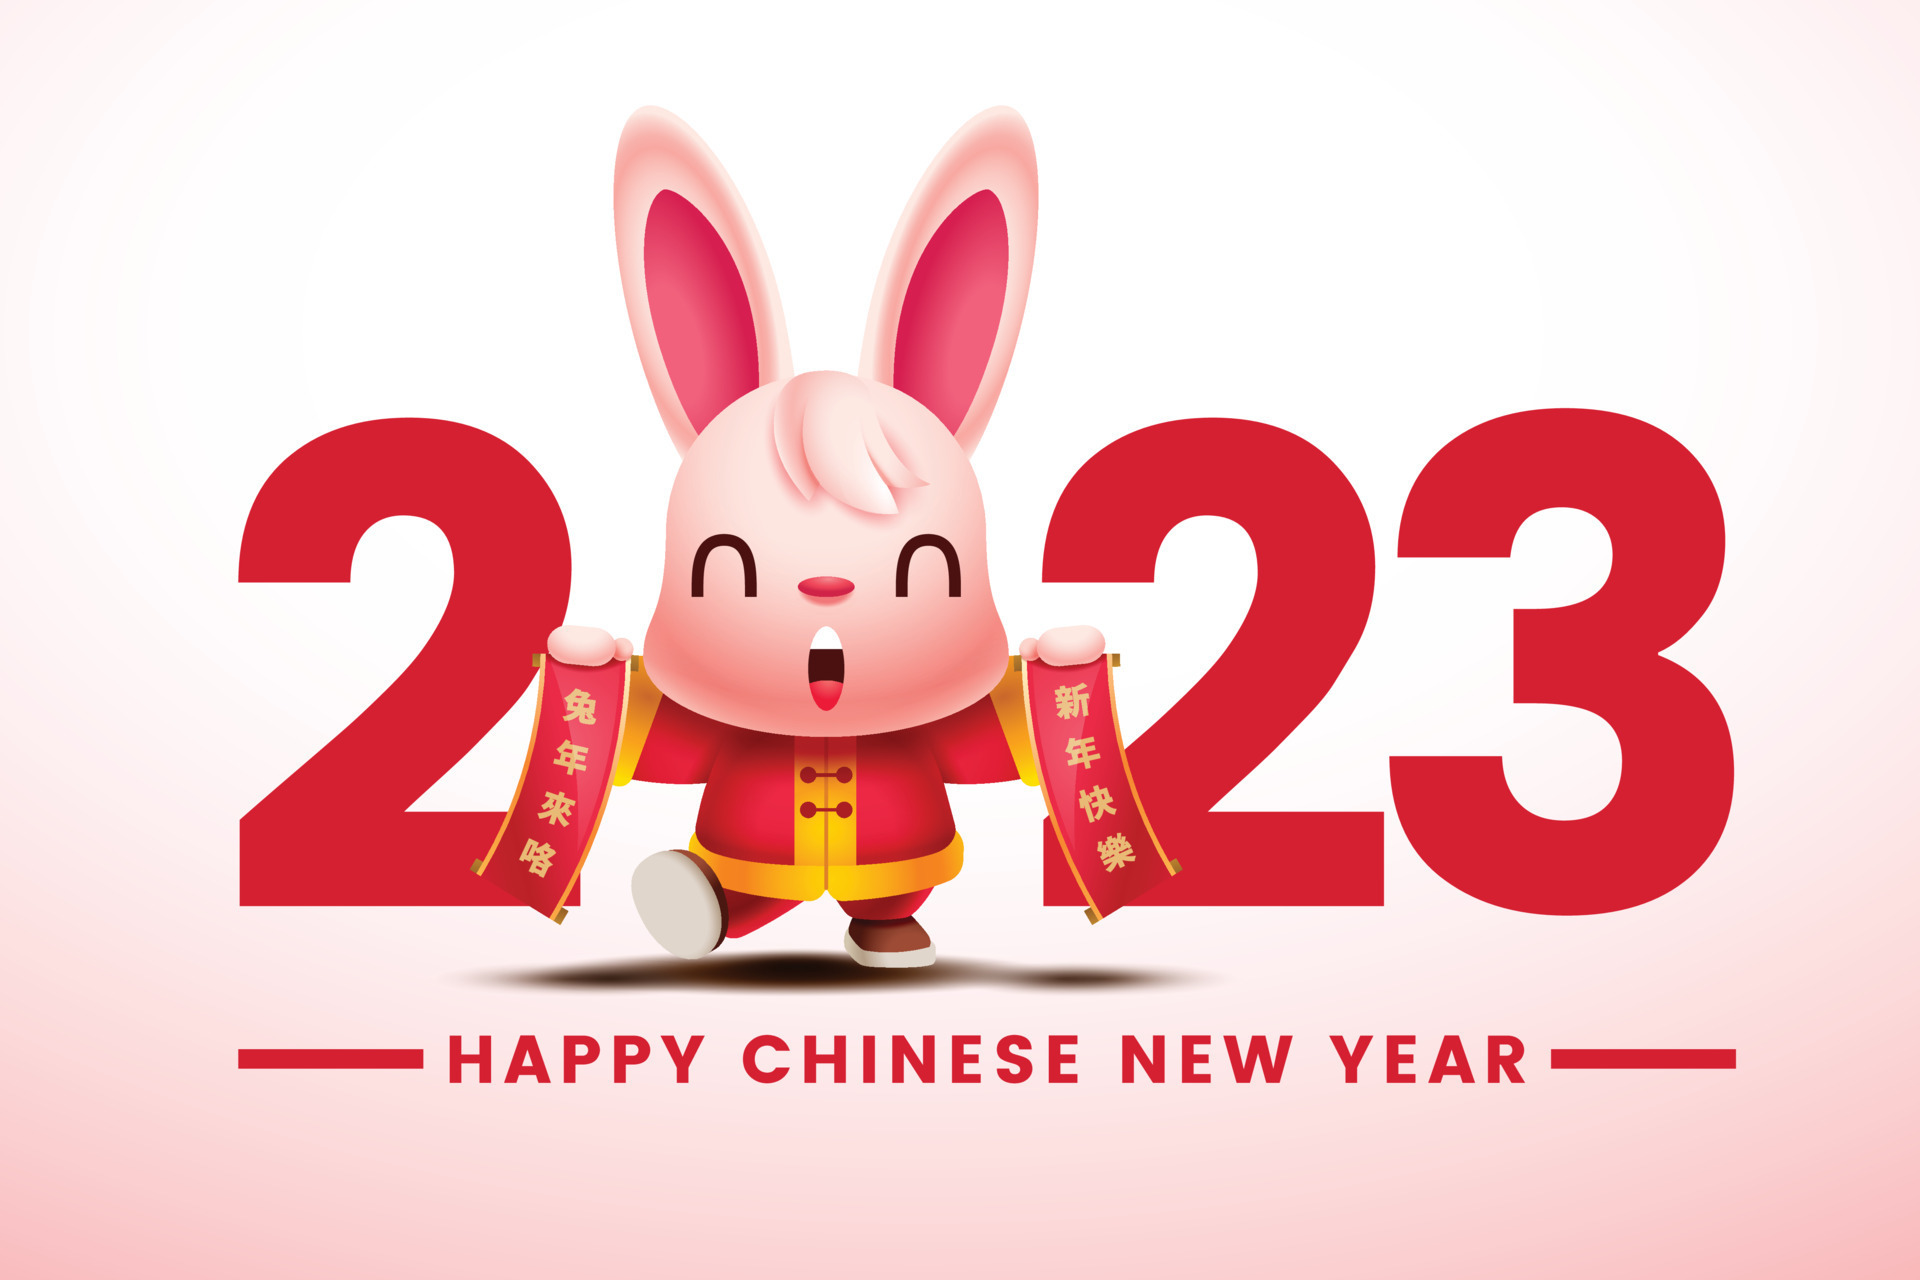 chinese-new-year-2023-greeting-card-cartoon-cute-rabbit-holding-chinese-hand-scrolls-with-big